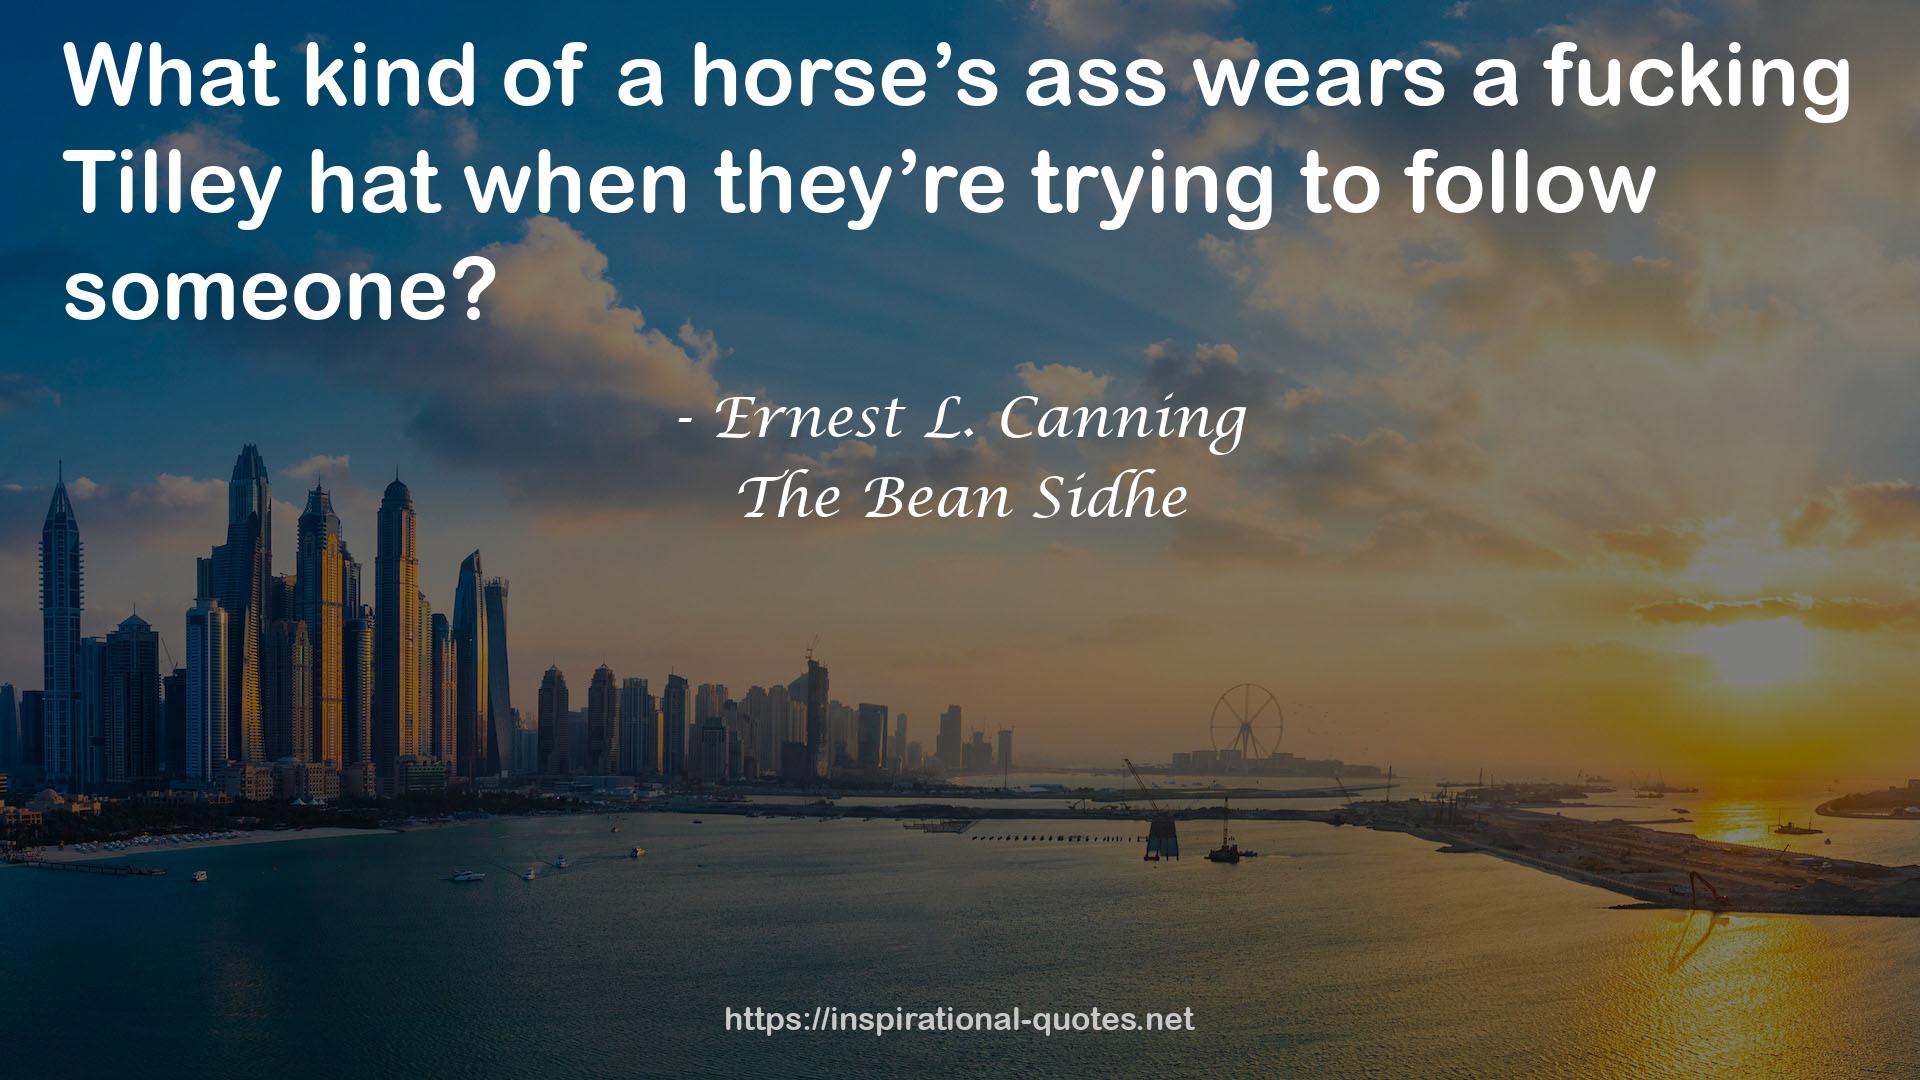 Ernest L. Canning QUOTES